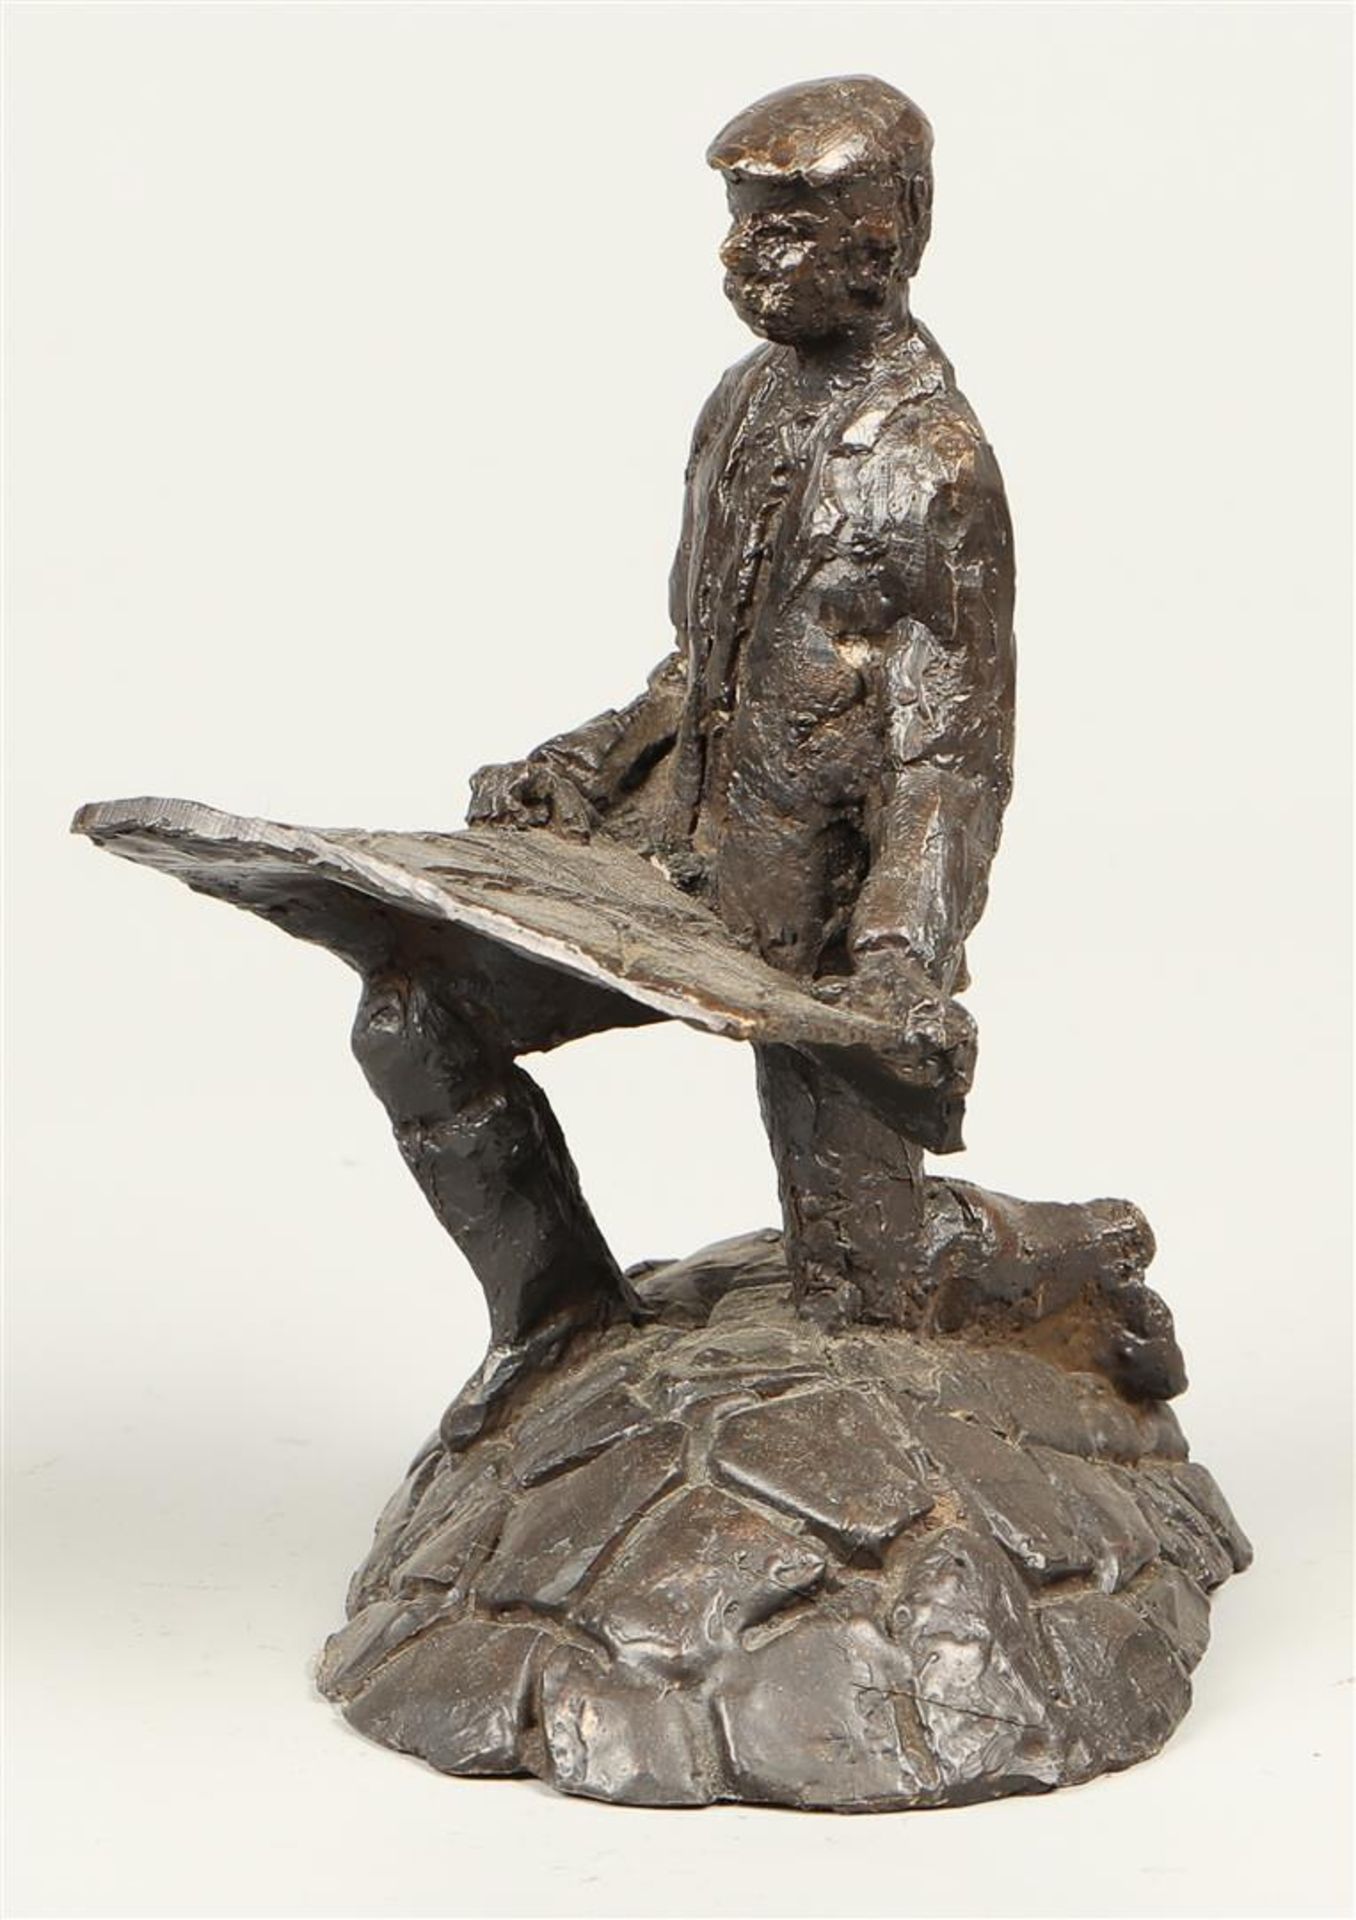 and three decorative bronze statuettes of rockers, two heads, and a dike warden. - Image 6 of 7